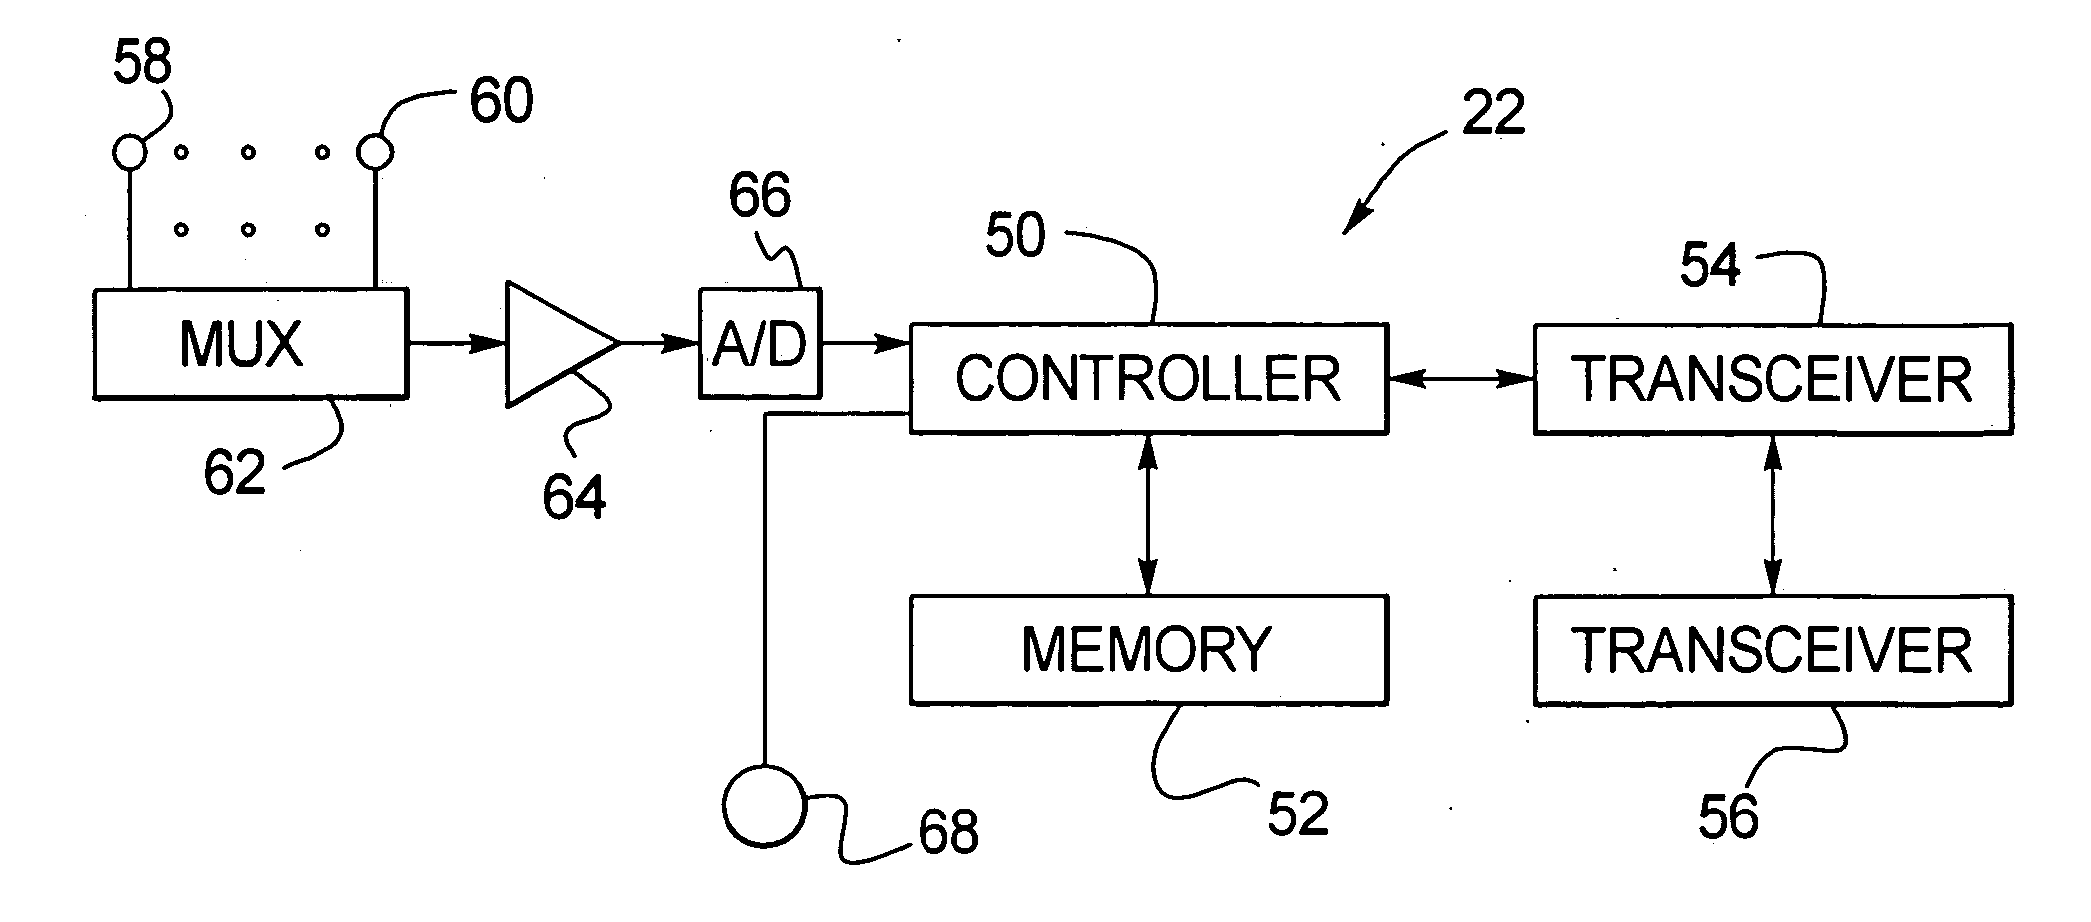 Well control and monitoring system using high temperature electronics